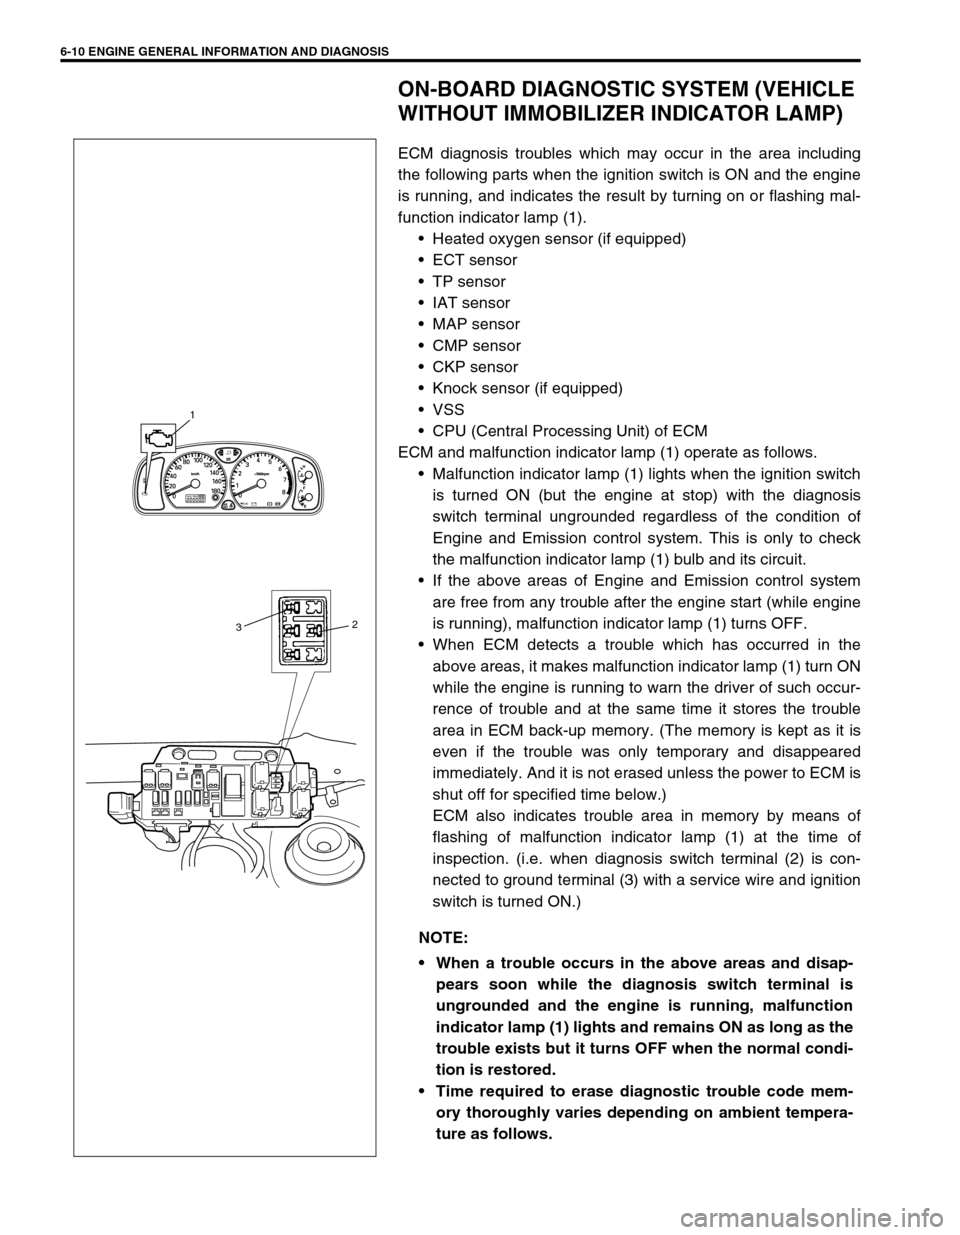 SUZUKI SWIFT 2000 1.G RG413 Service Workshop Manual 6-10 ENGINE GENERAL INFORMATION AND DIAGNOSIS
ON-BOARD DIAGNOSTIC SYSTEM (VEHICLE 
WITHOUT IMMOBILIZER INDICATOR LAMP)
ECM diagnosis troubles which may occur in the area including
the following parts 